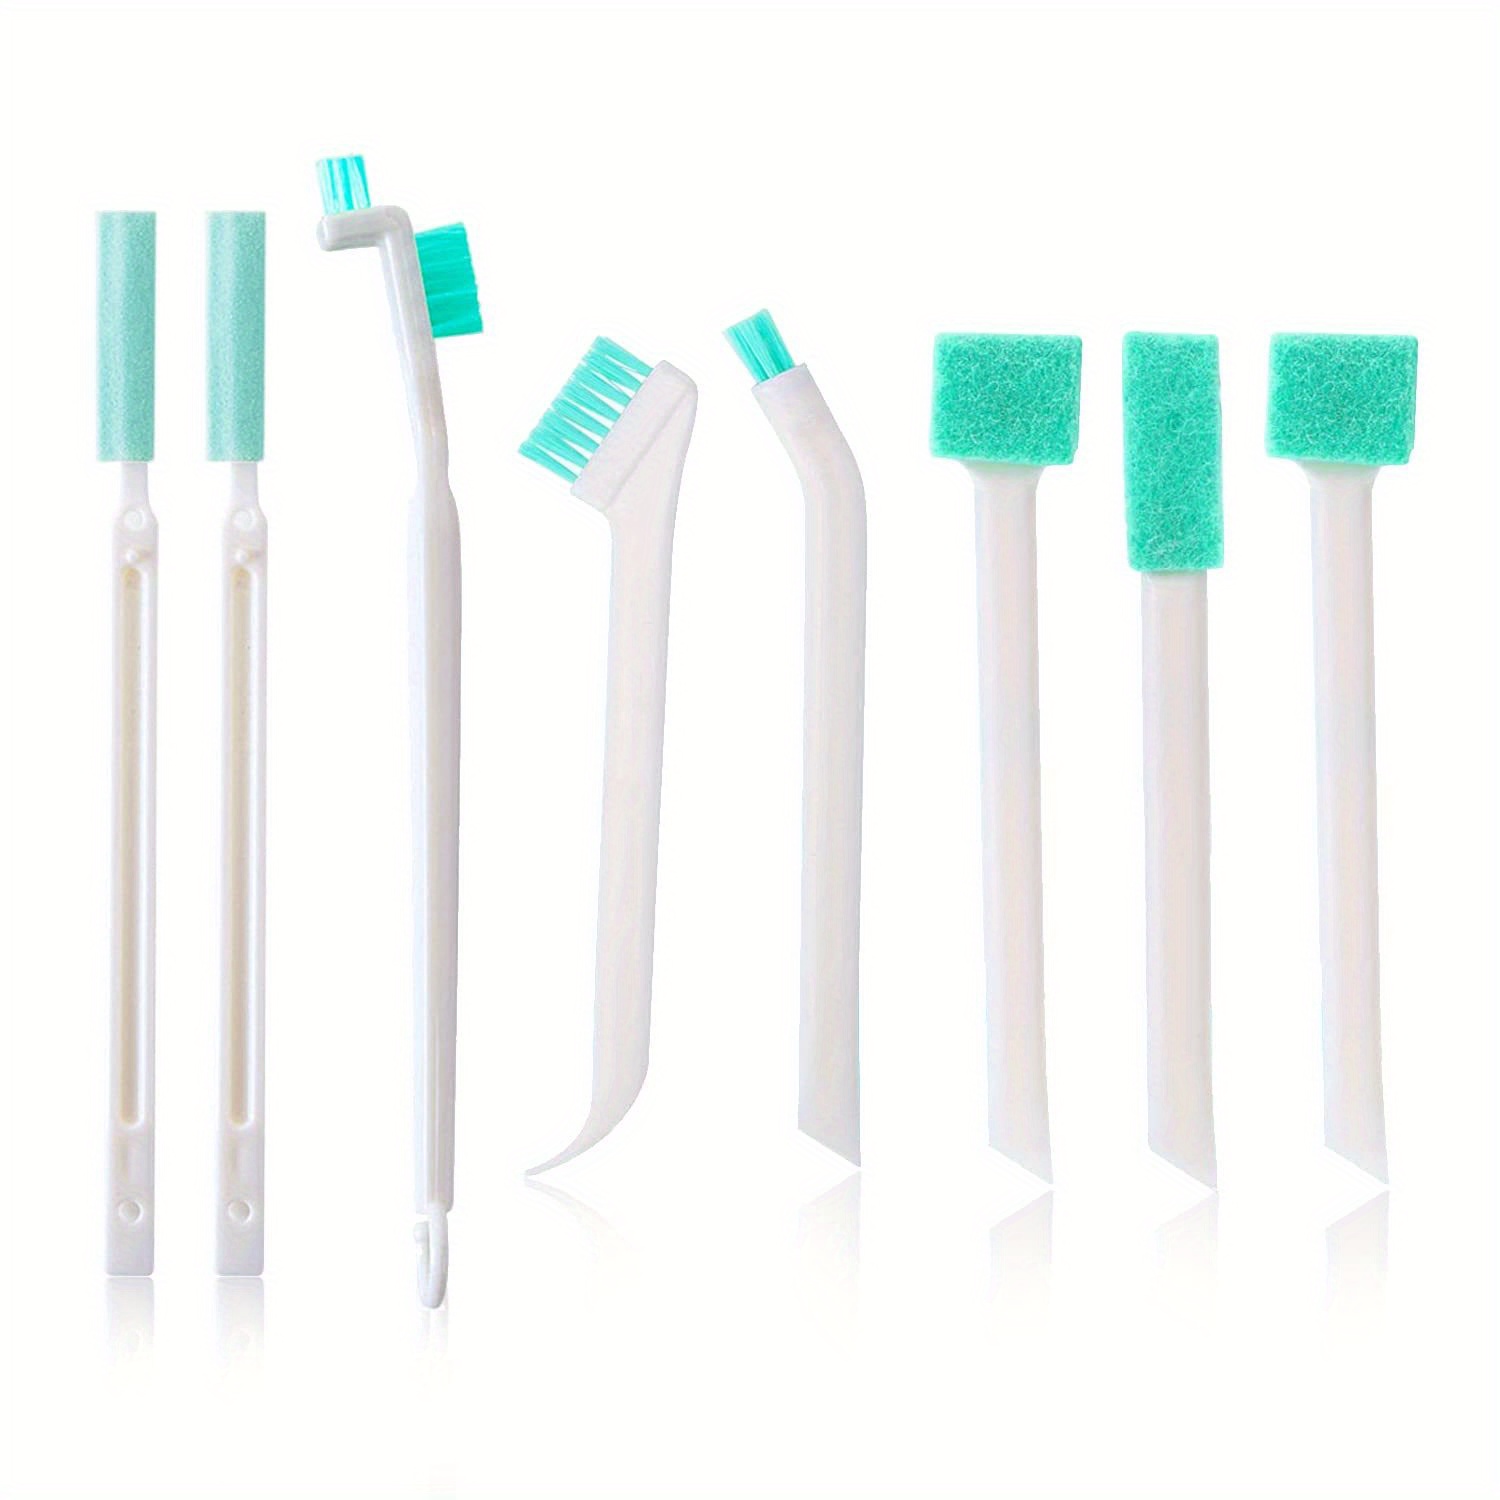 8Pcs Small Cleaning Brushes for Household,Crevice Cleaning Tool